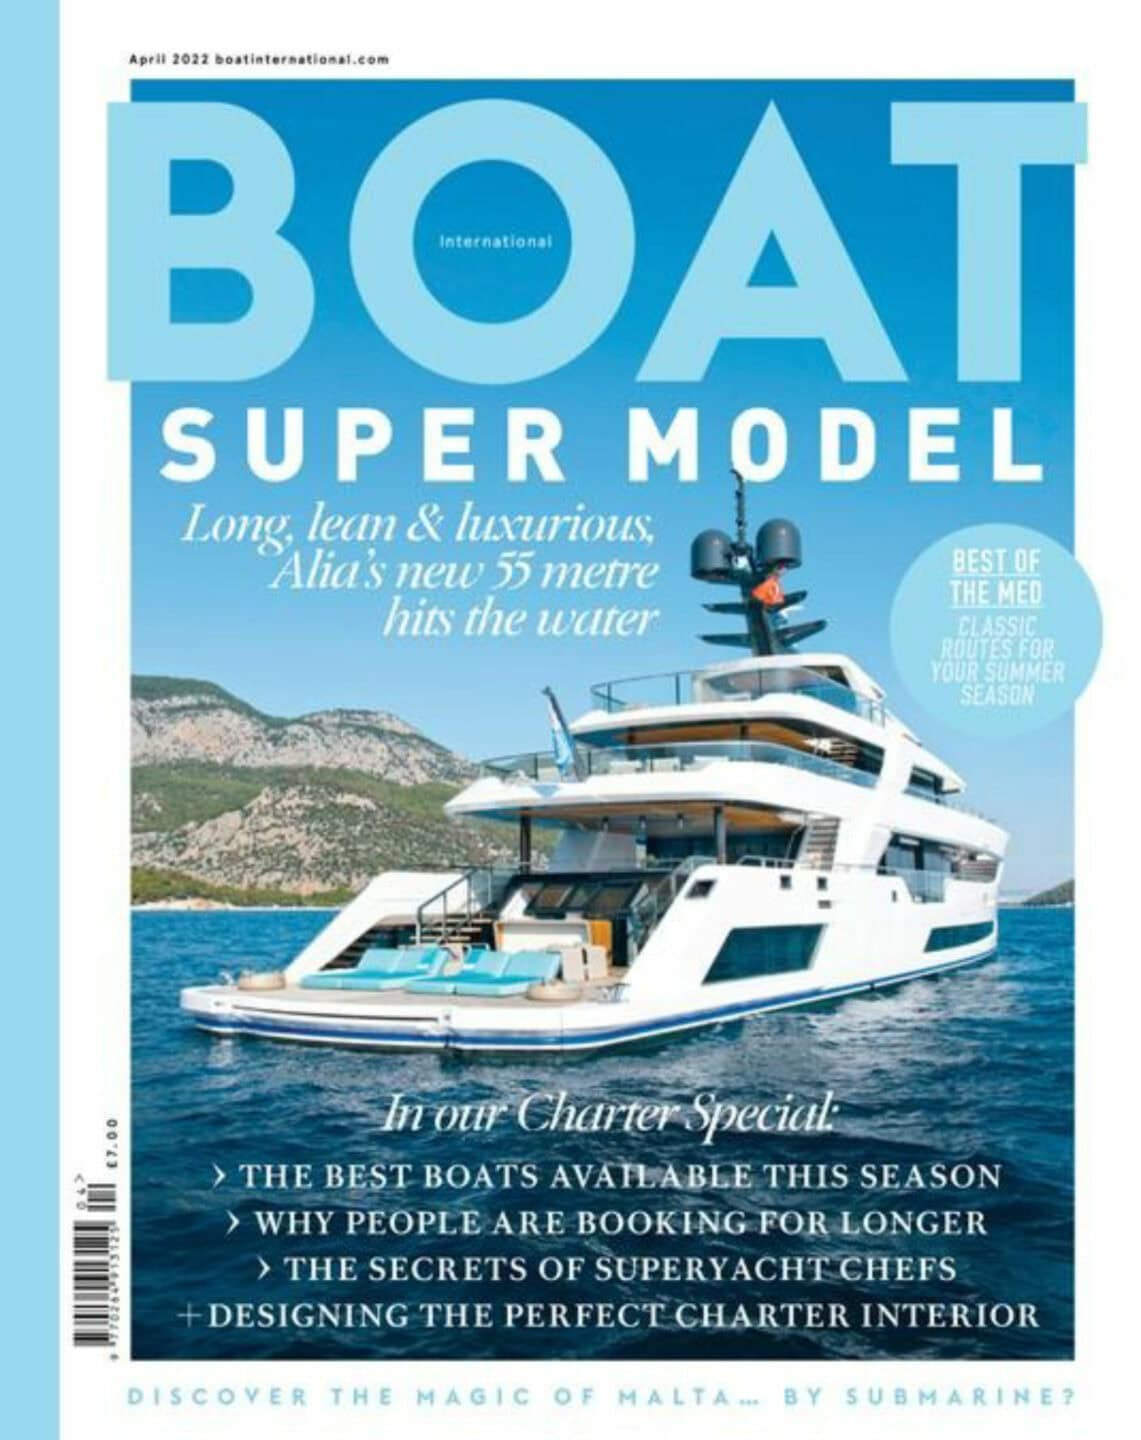 Boat international April 2022 article about AL WAAB